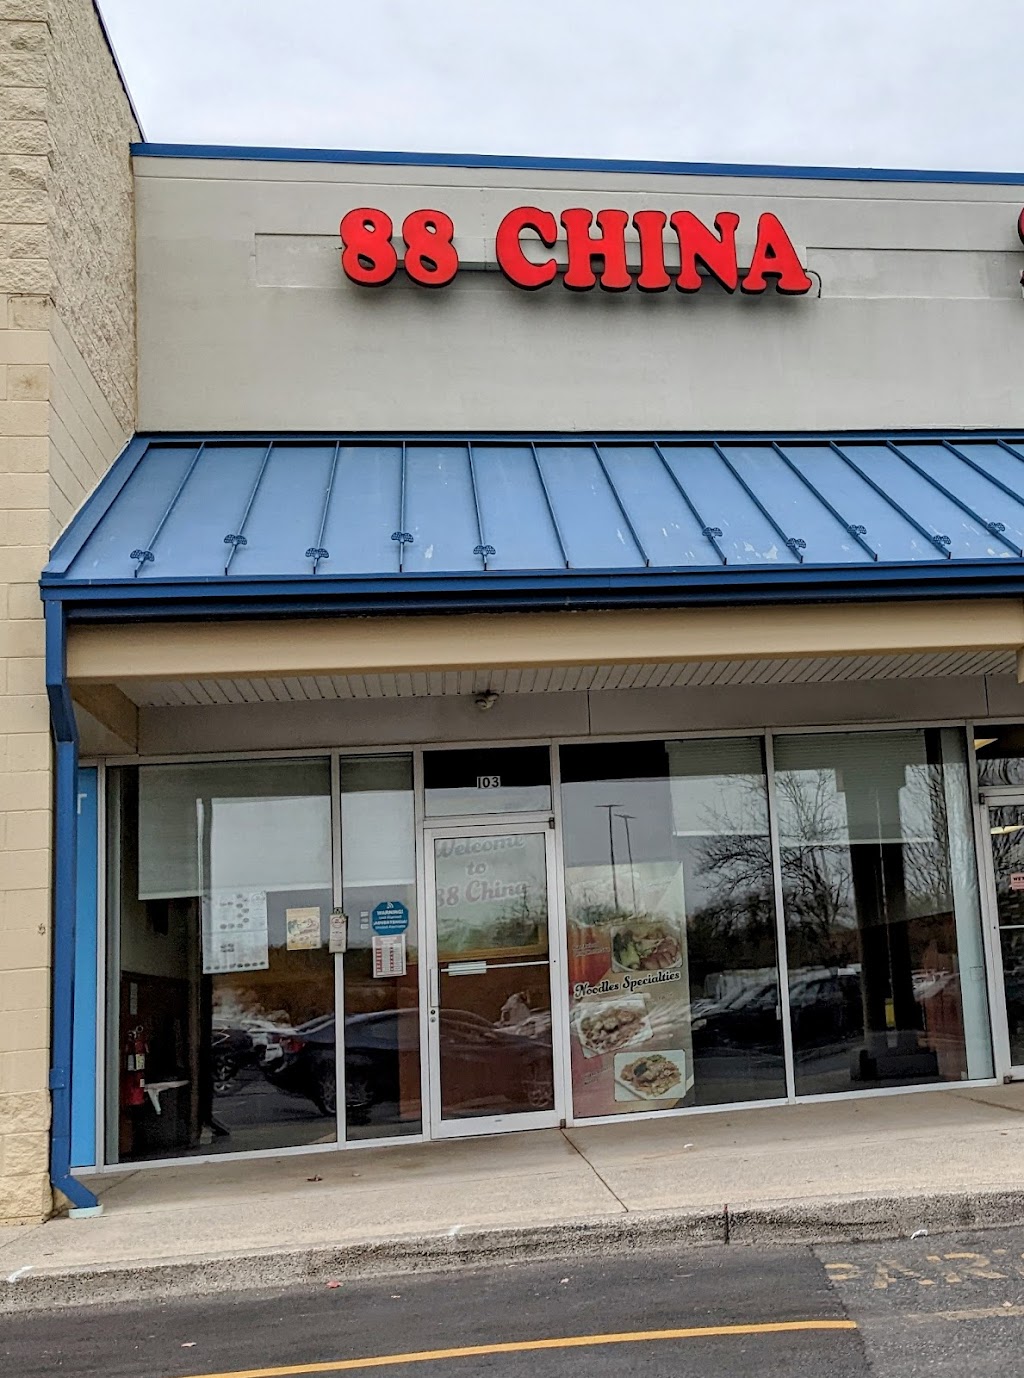 88 China Premium Chinese & Asian Cuisine | 1091 Mill Creek Rd #103, Allentown, PA 18106 | Phone: (610) 398-8088